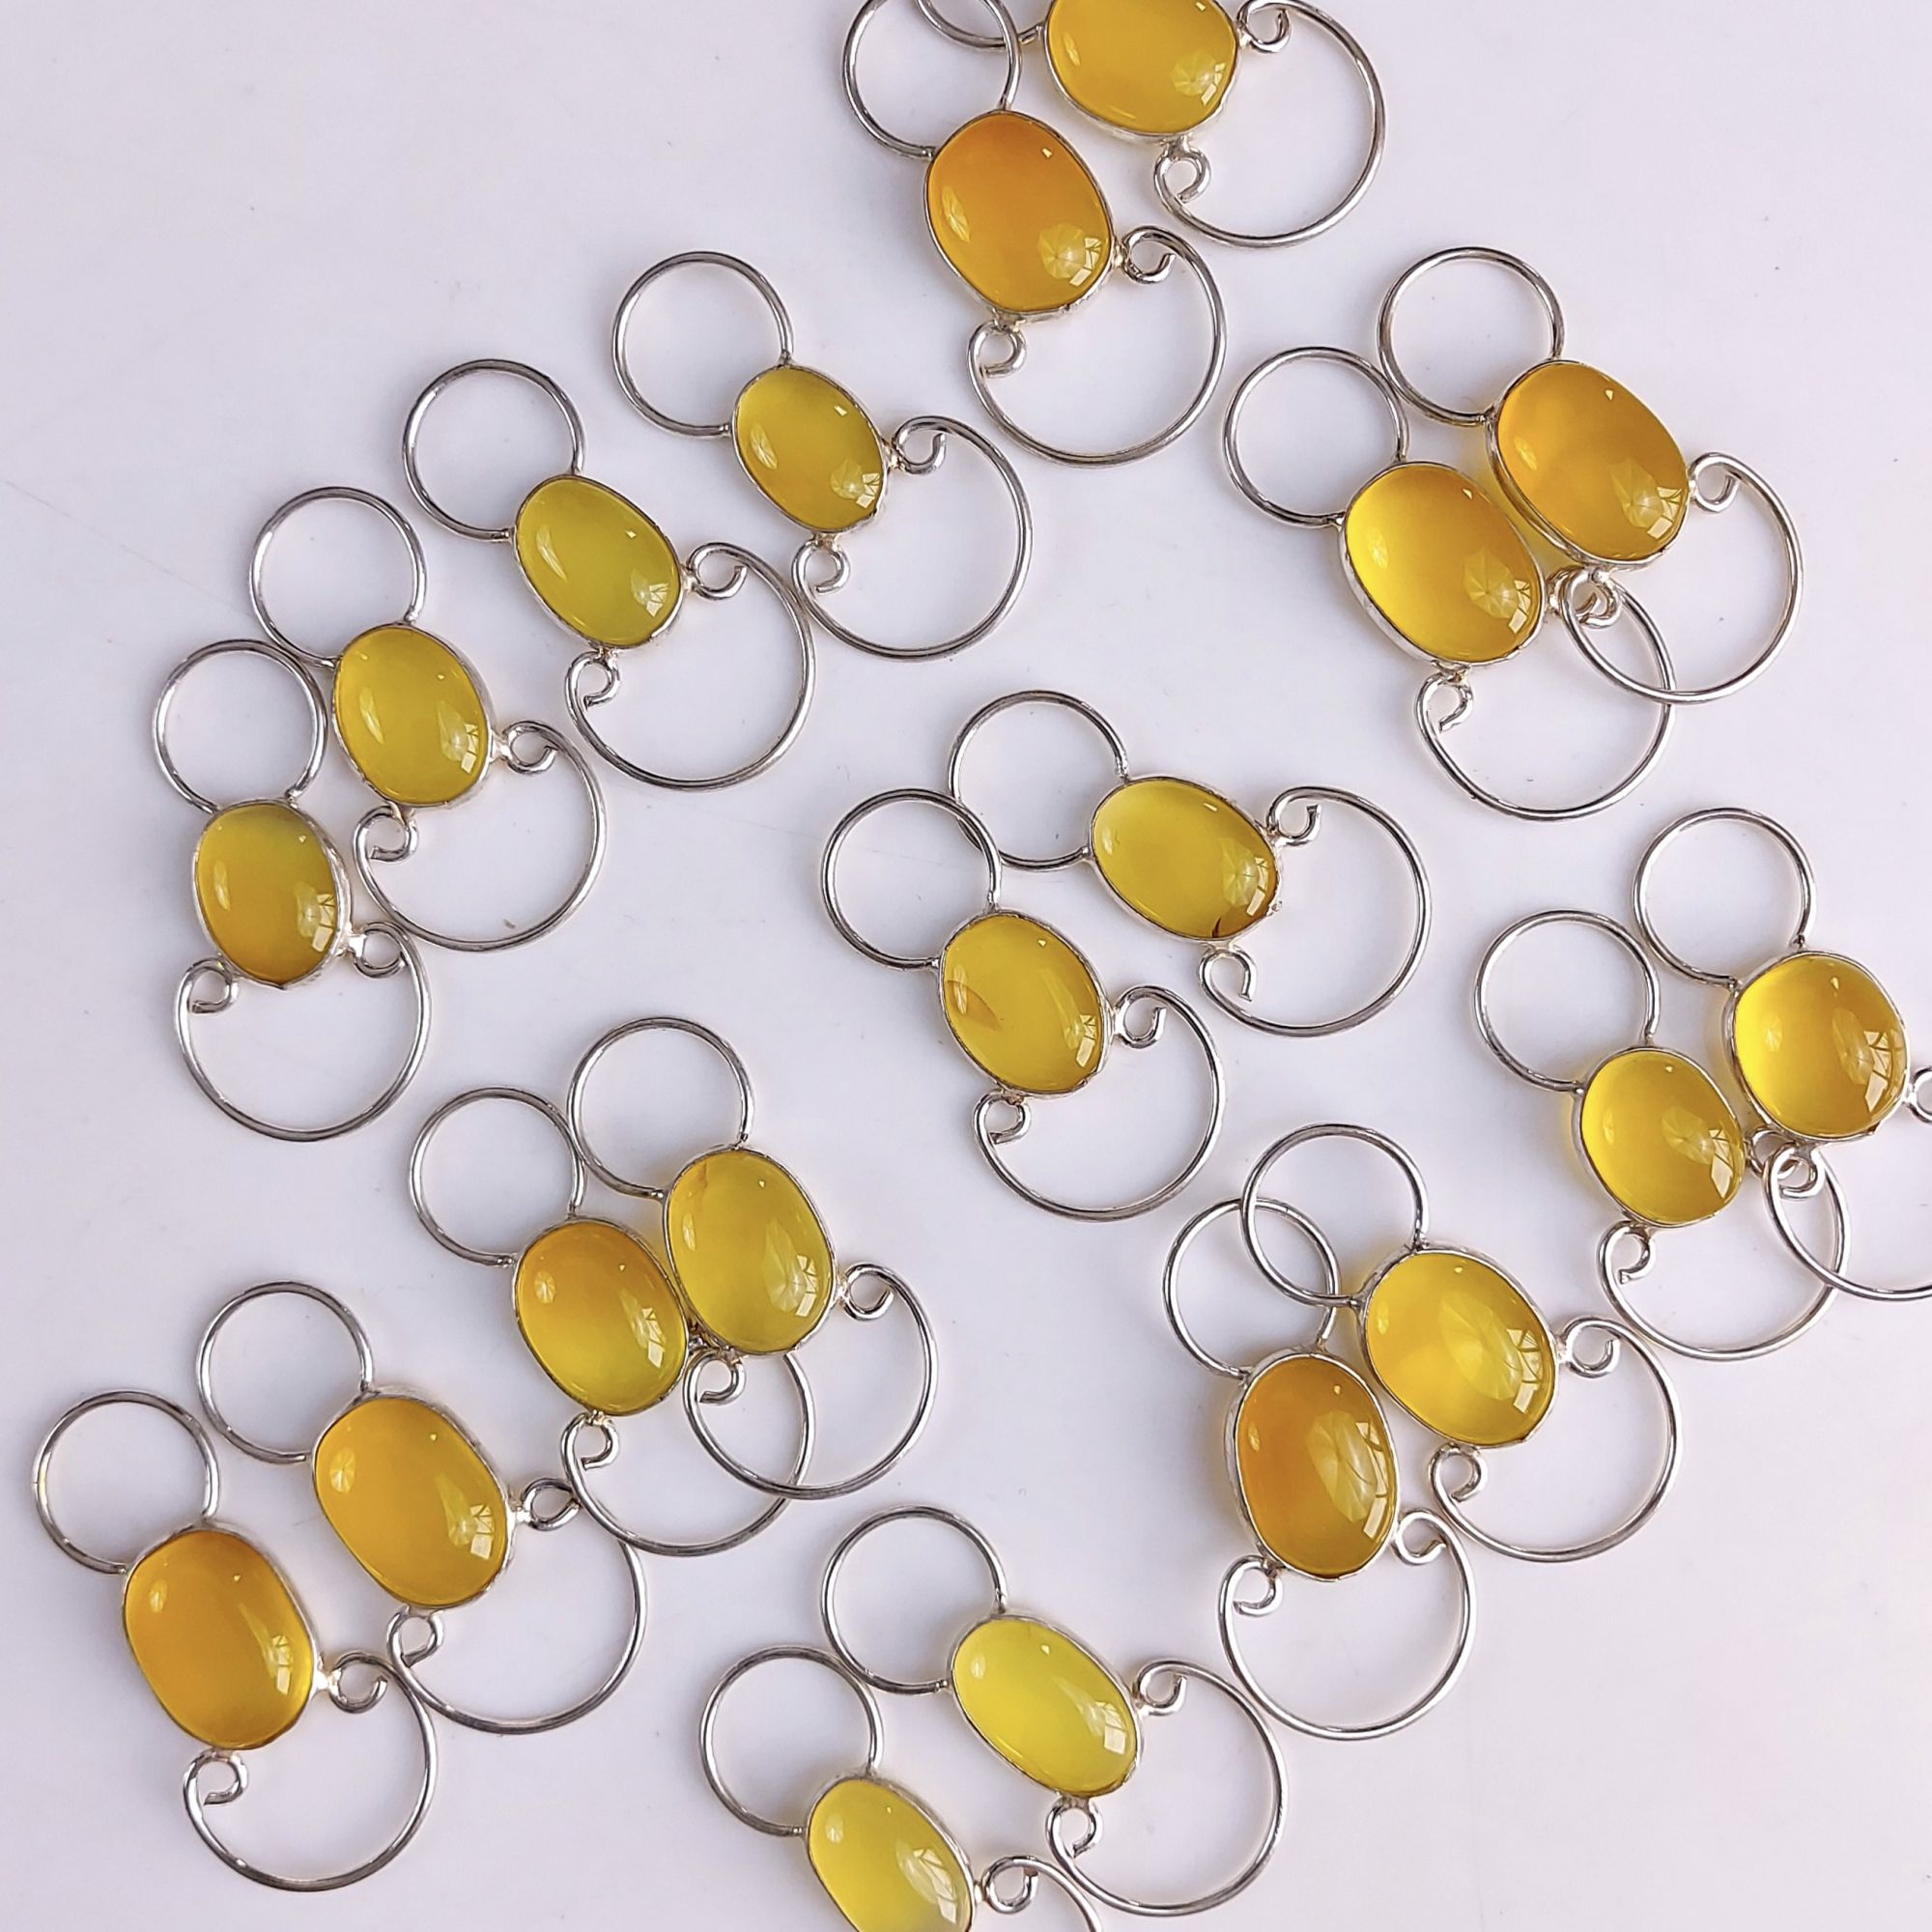 10Pair 334Cts Natural Yellow Onyx Silver Plated Gemstone Earring Pair Connector Lot 13x10mm#565